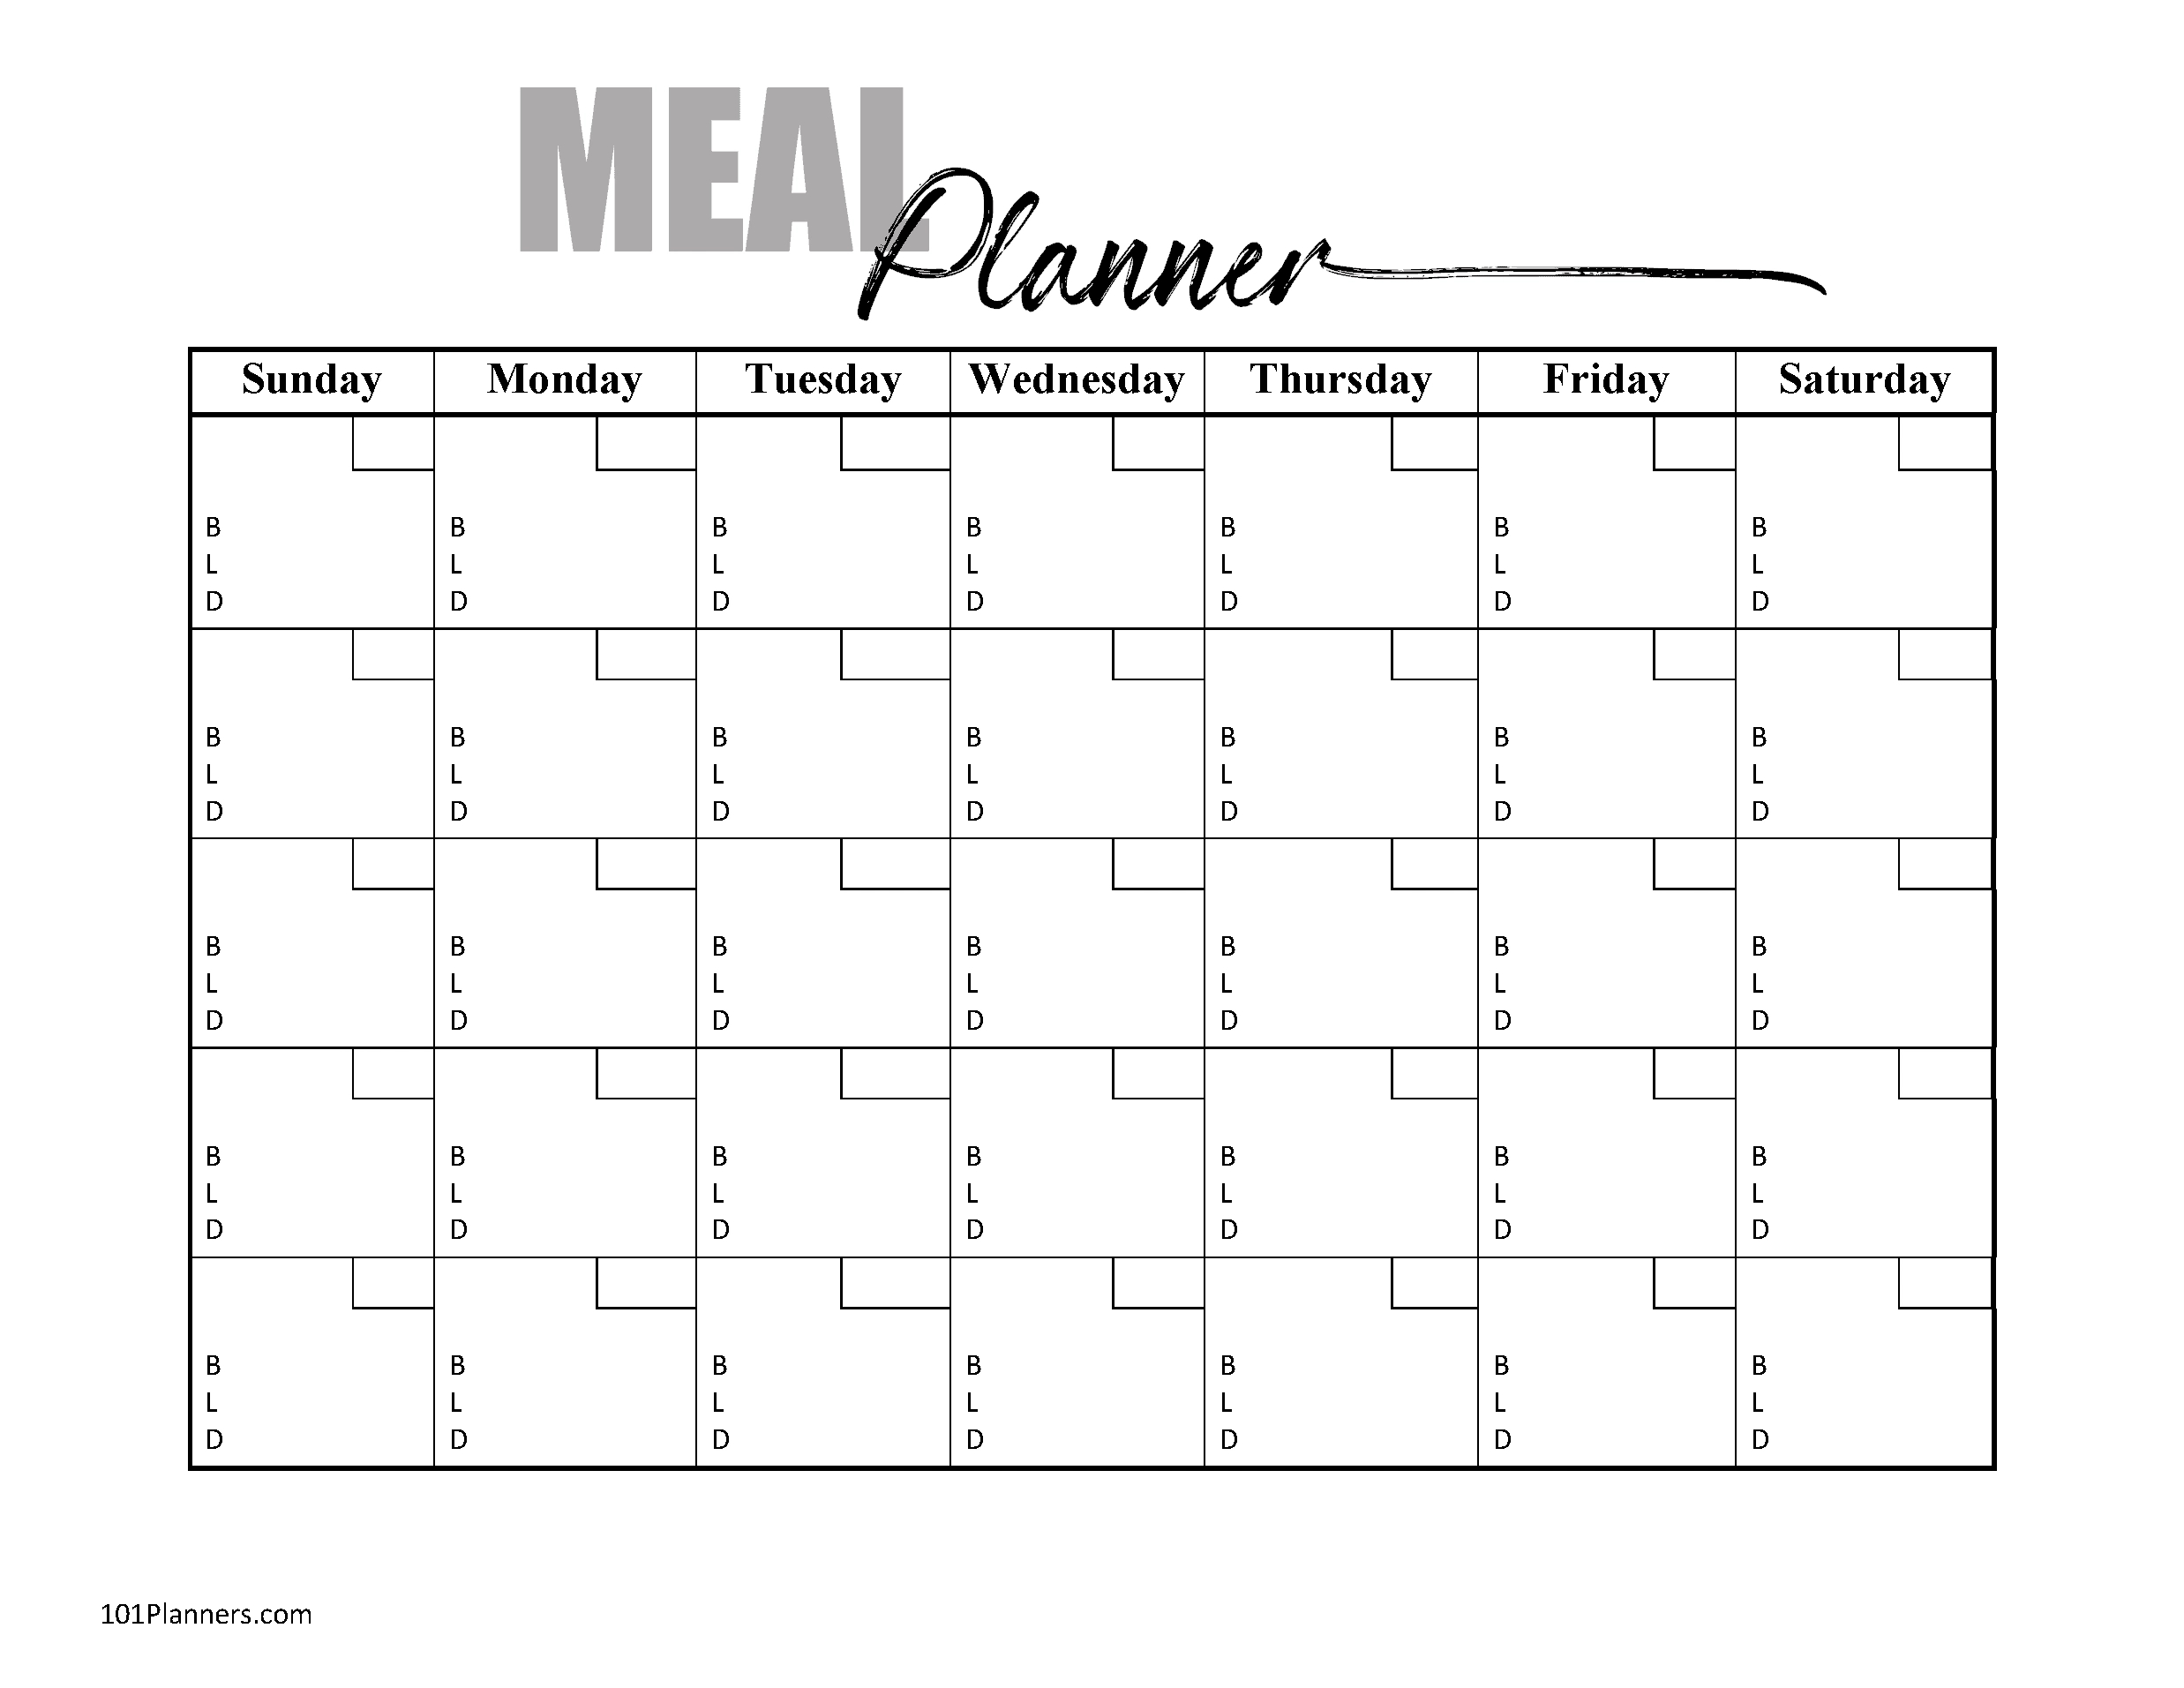 Free Printable Meal Plan Template | Customize Before You Print with regard to Free Printable Monthly Meal Planner